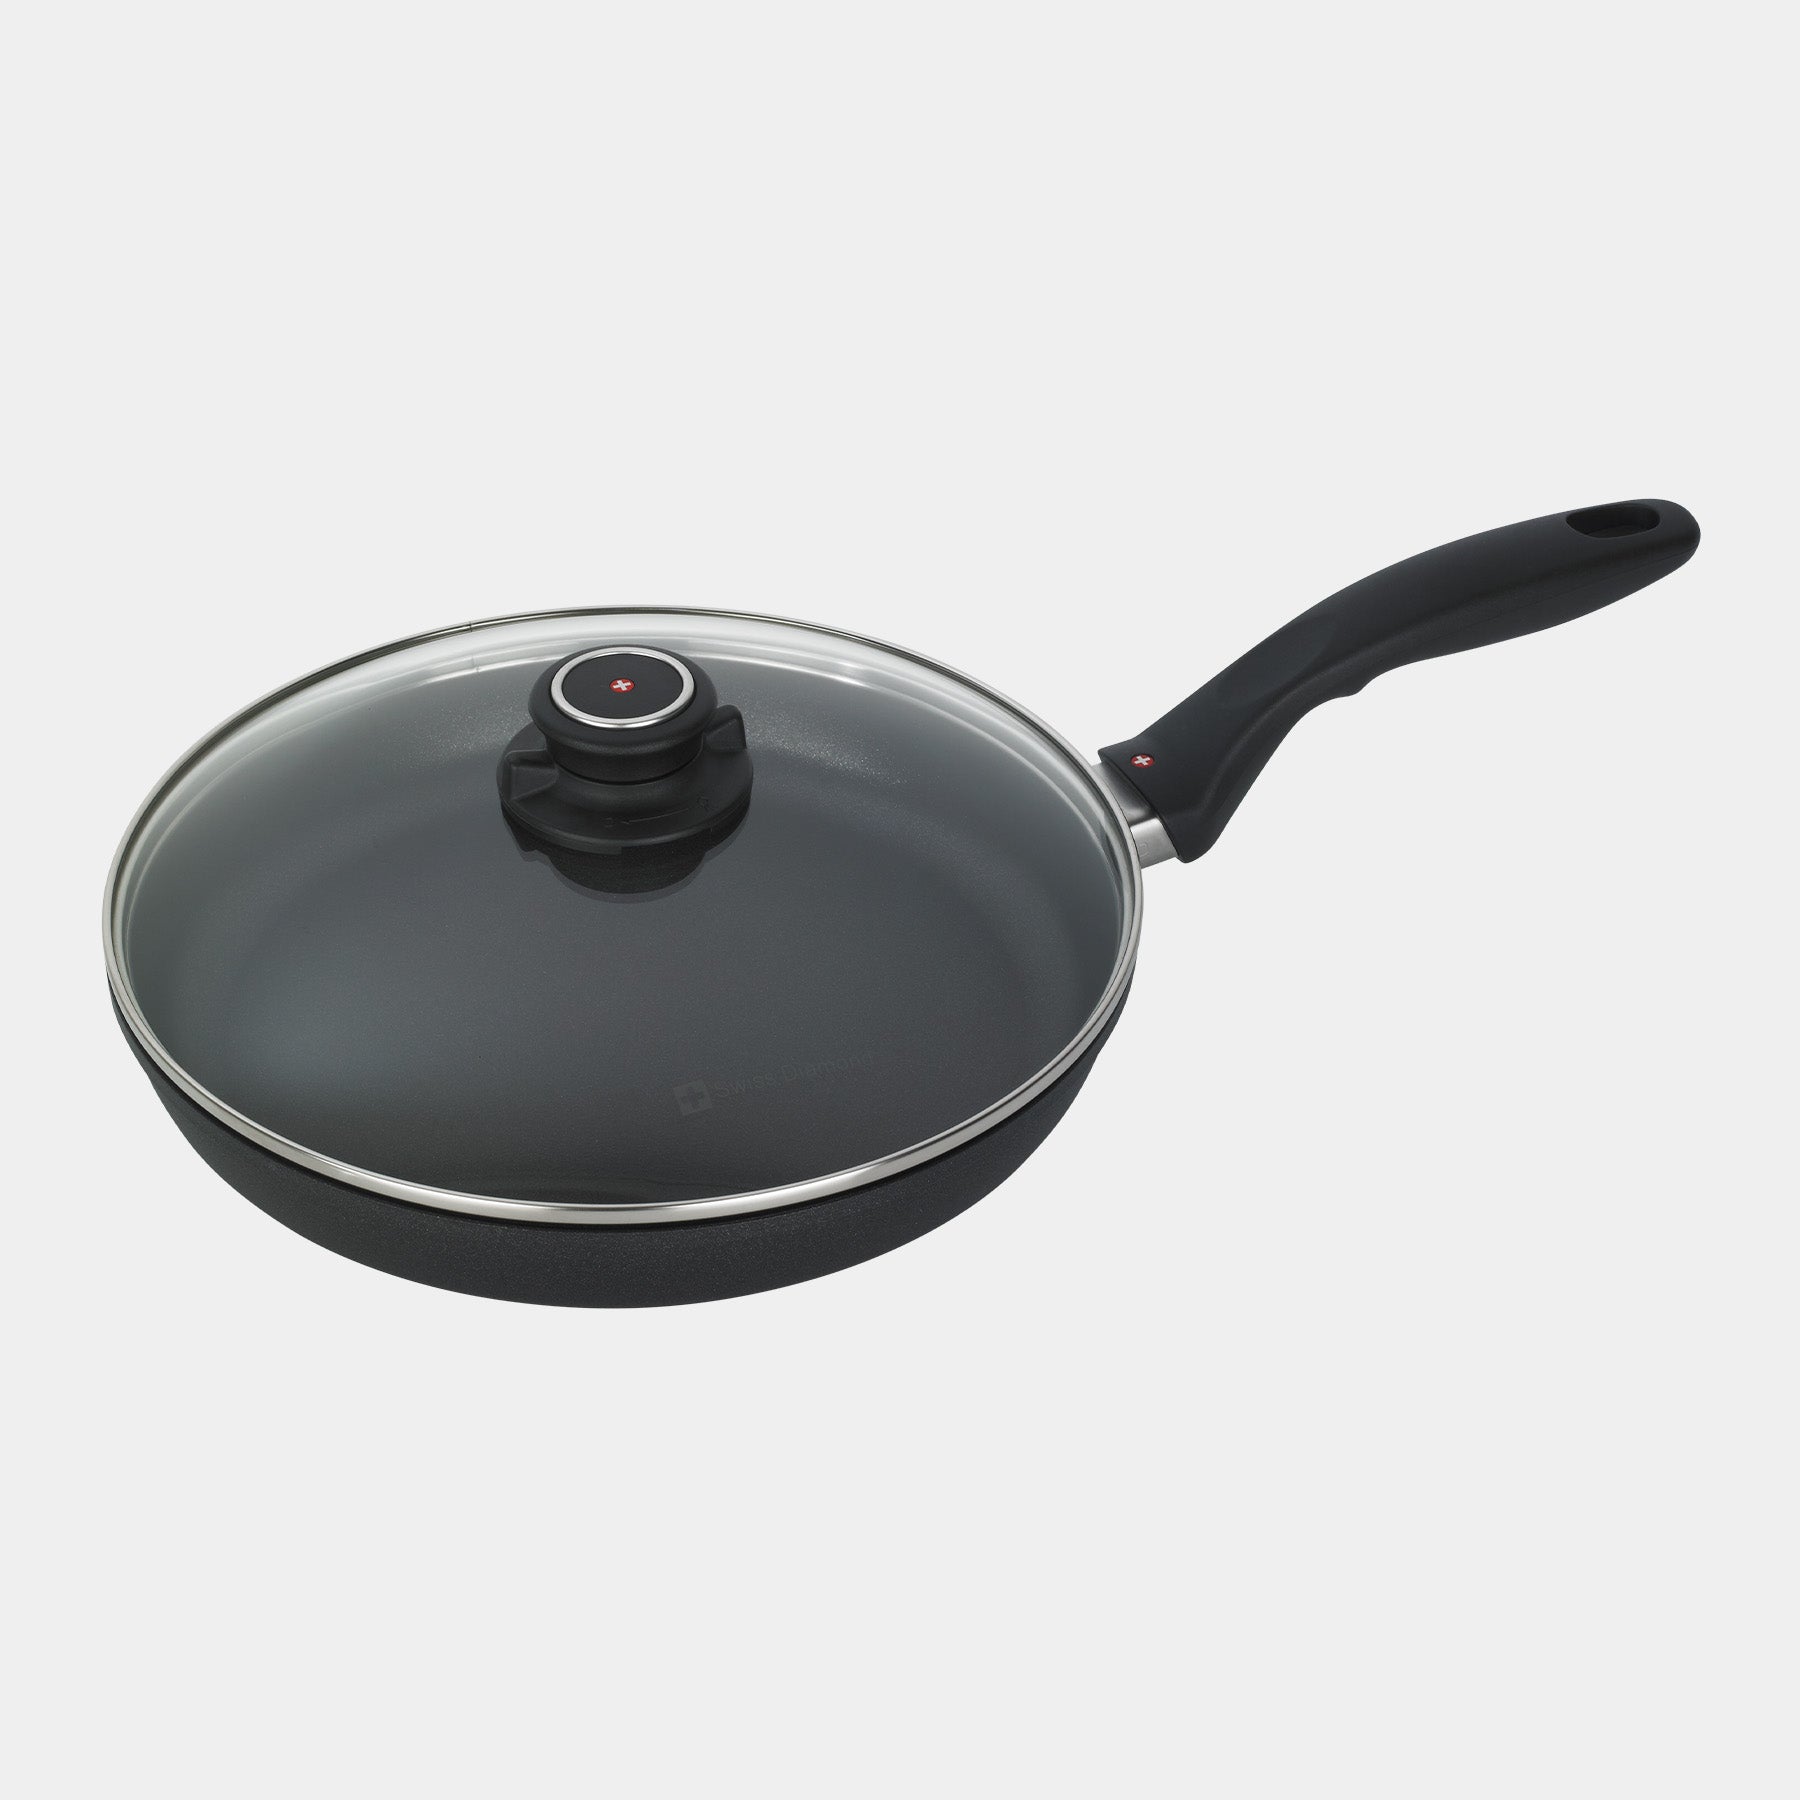 XD Nonstick 10.25" Fry Pan with glass lid